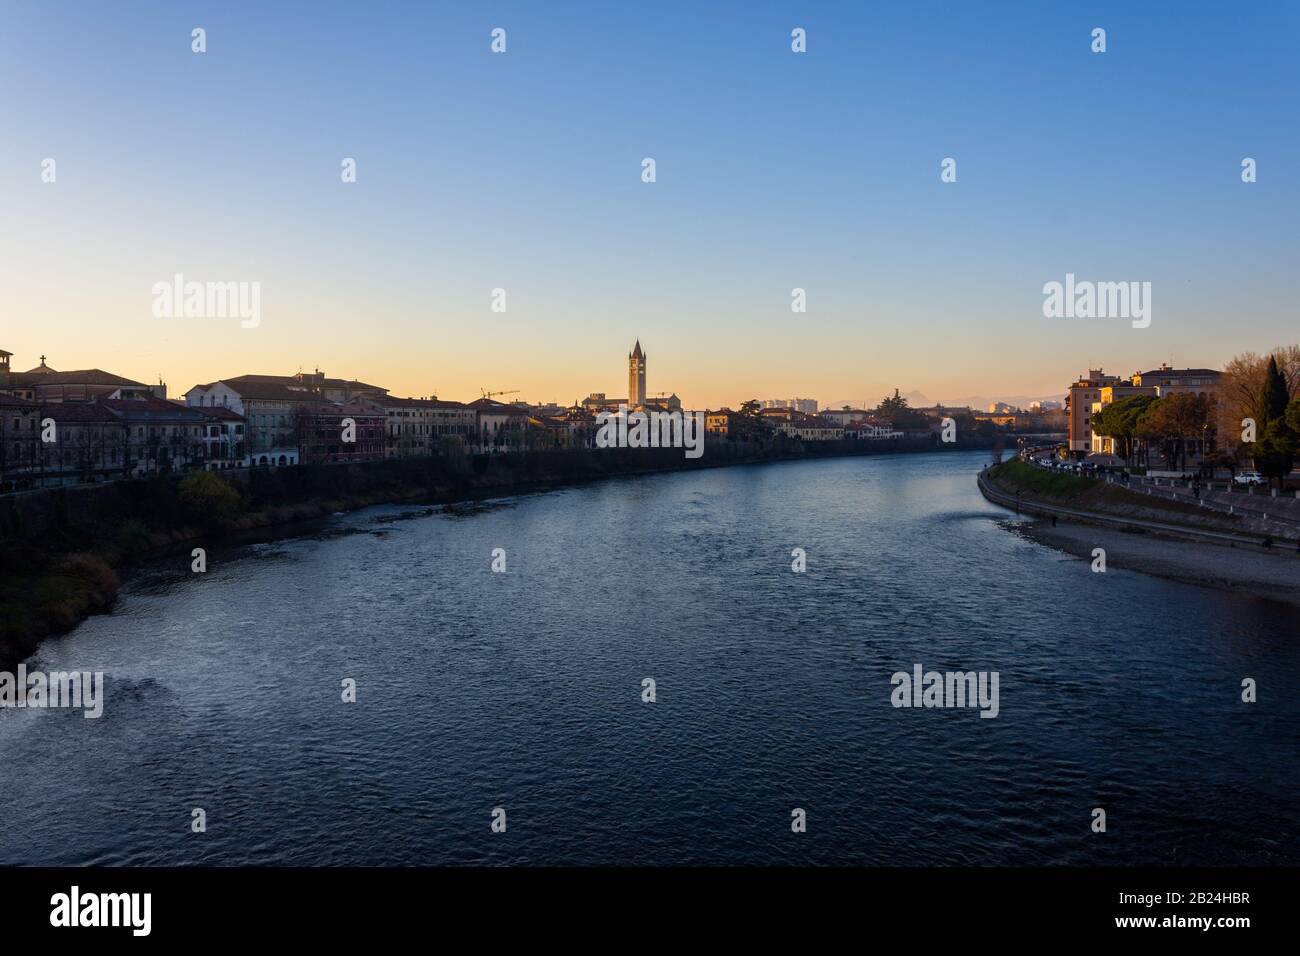 View of Verona and the Adige river from the Castelvecchio bridge, also known as the Scaliger bridge at the sunset Stock Photo